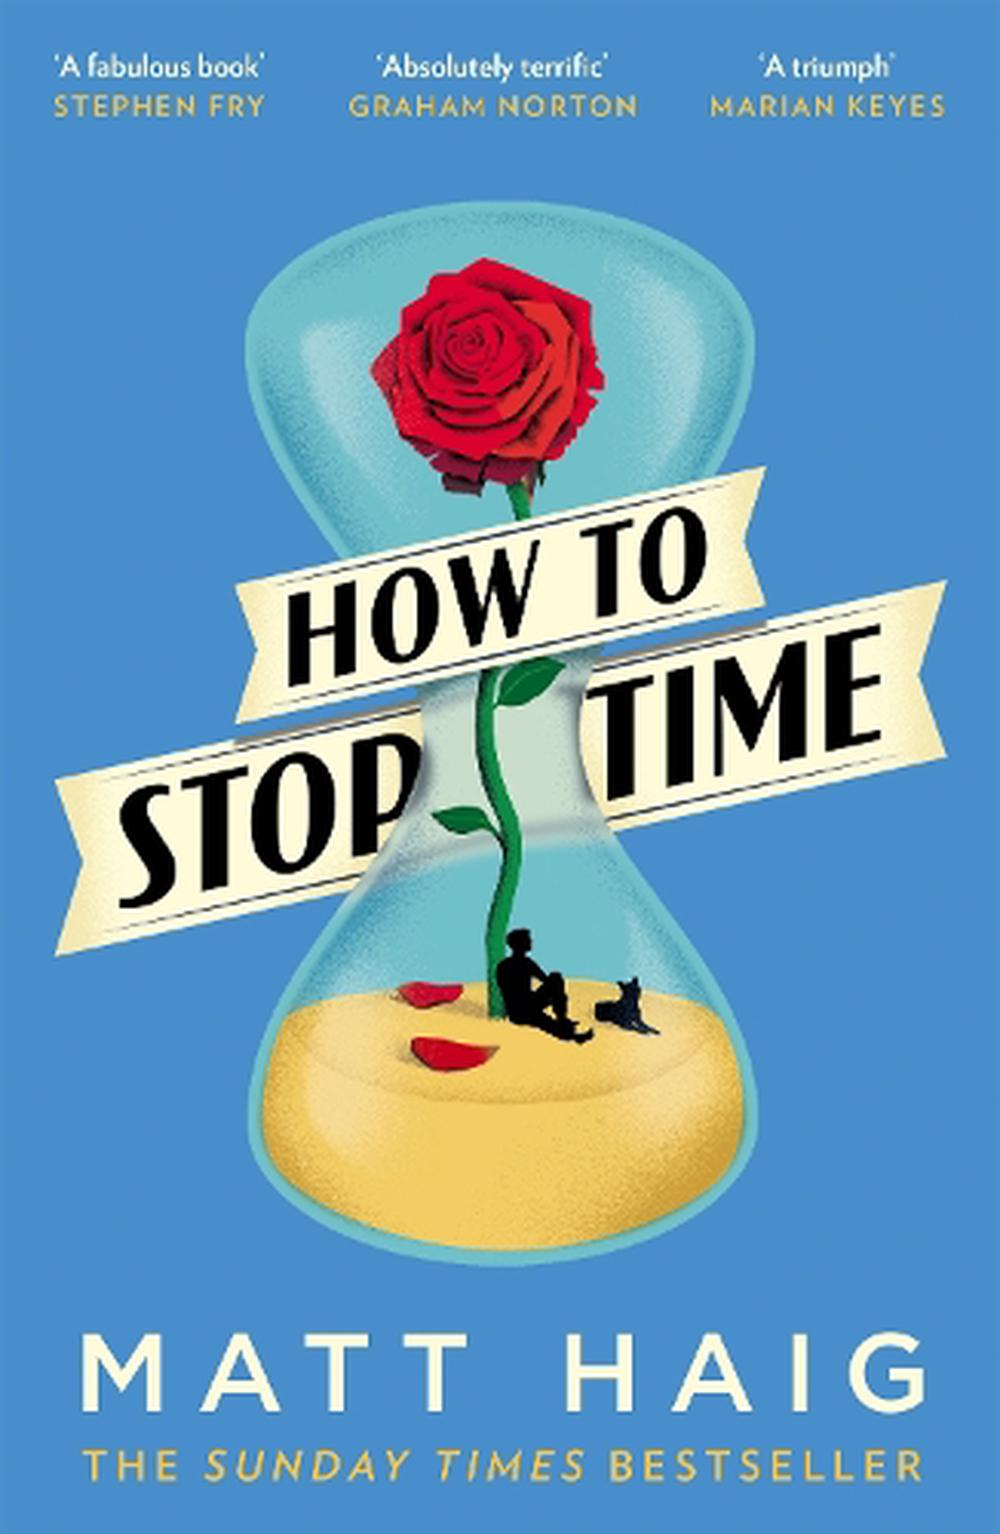 How to Stop Time by Matt Haig, Paperback, 9781782118640 Buy online at